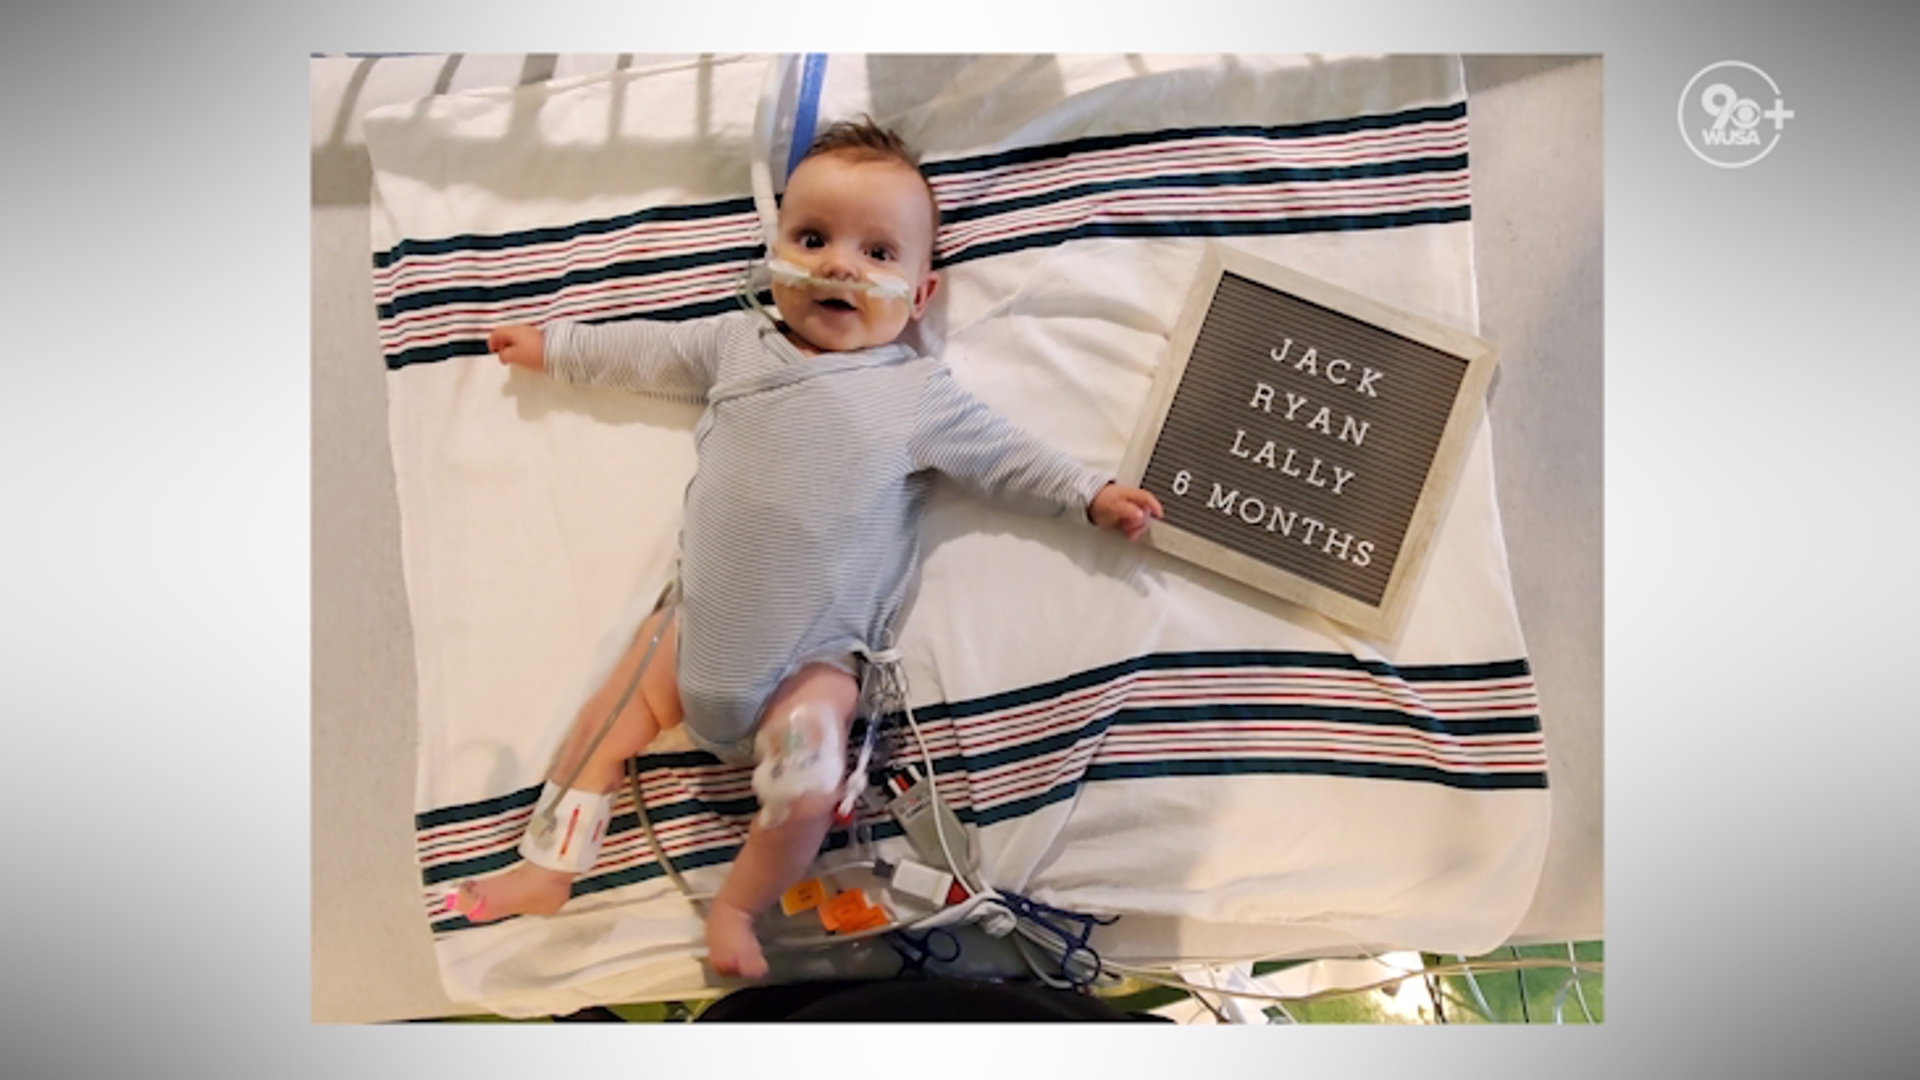 Jack Lally is a resilient, brave and strong baby who has been waiting for a new heart for more than half his short life.